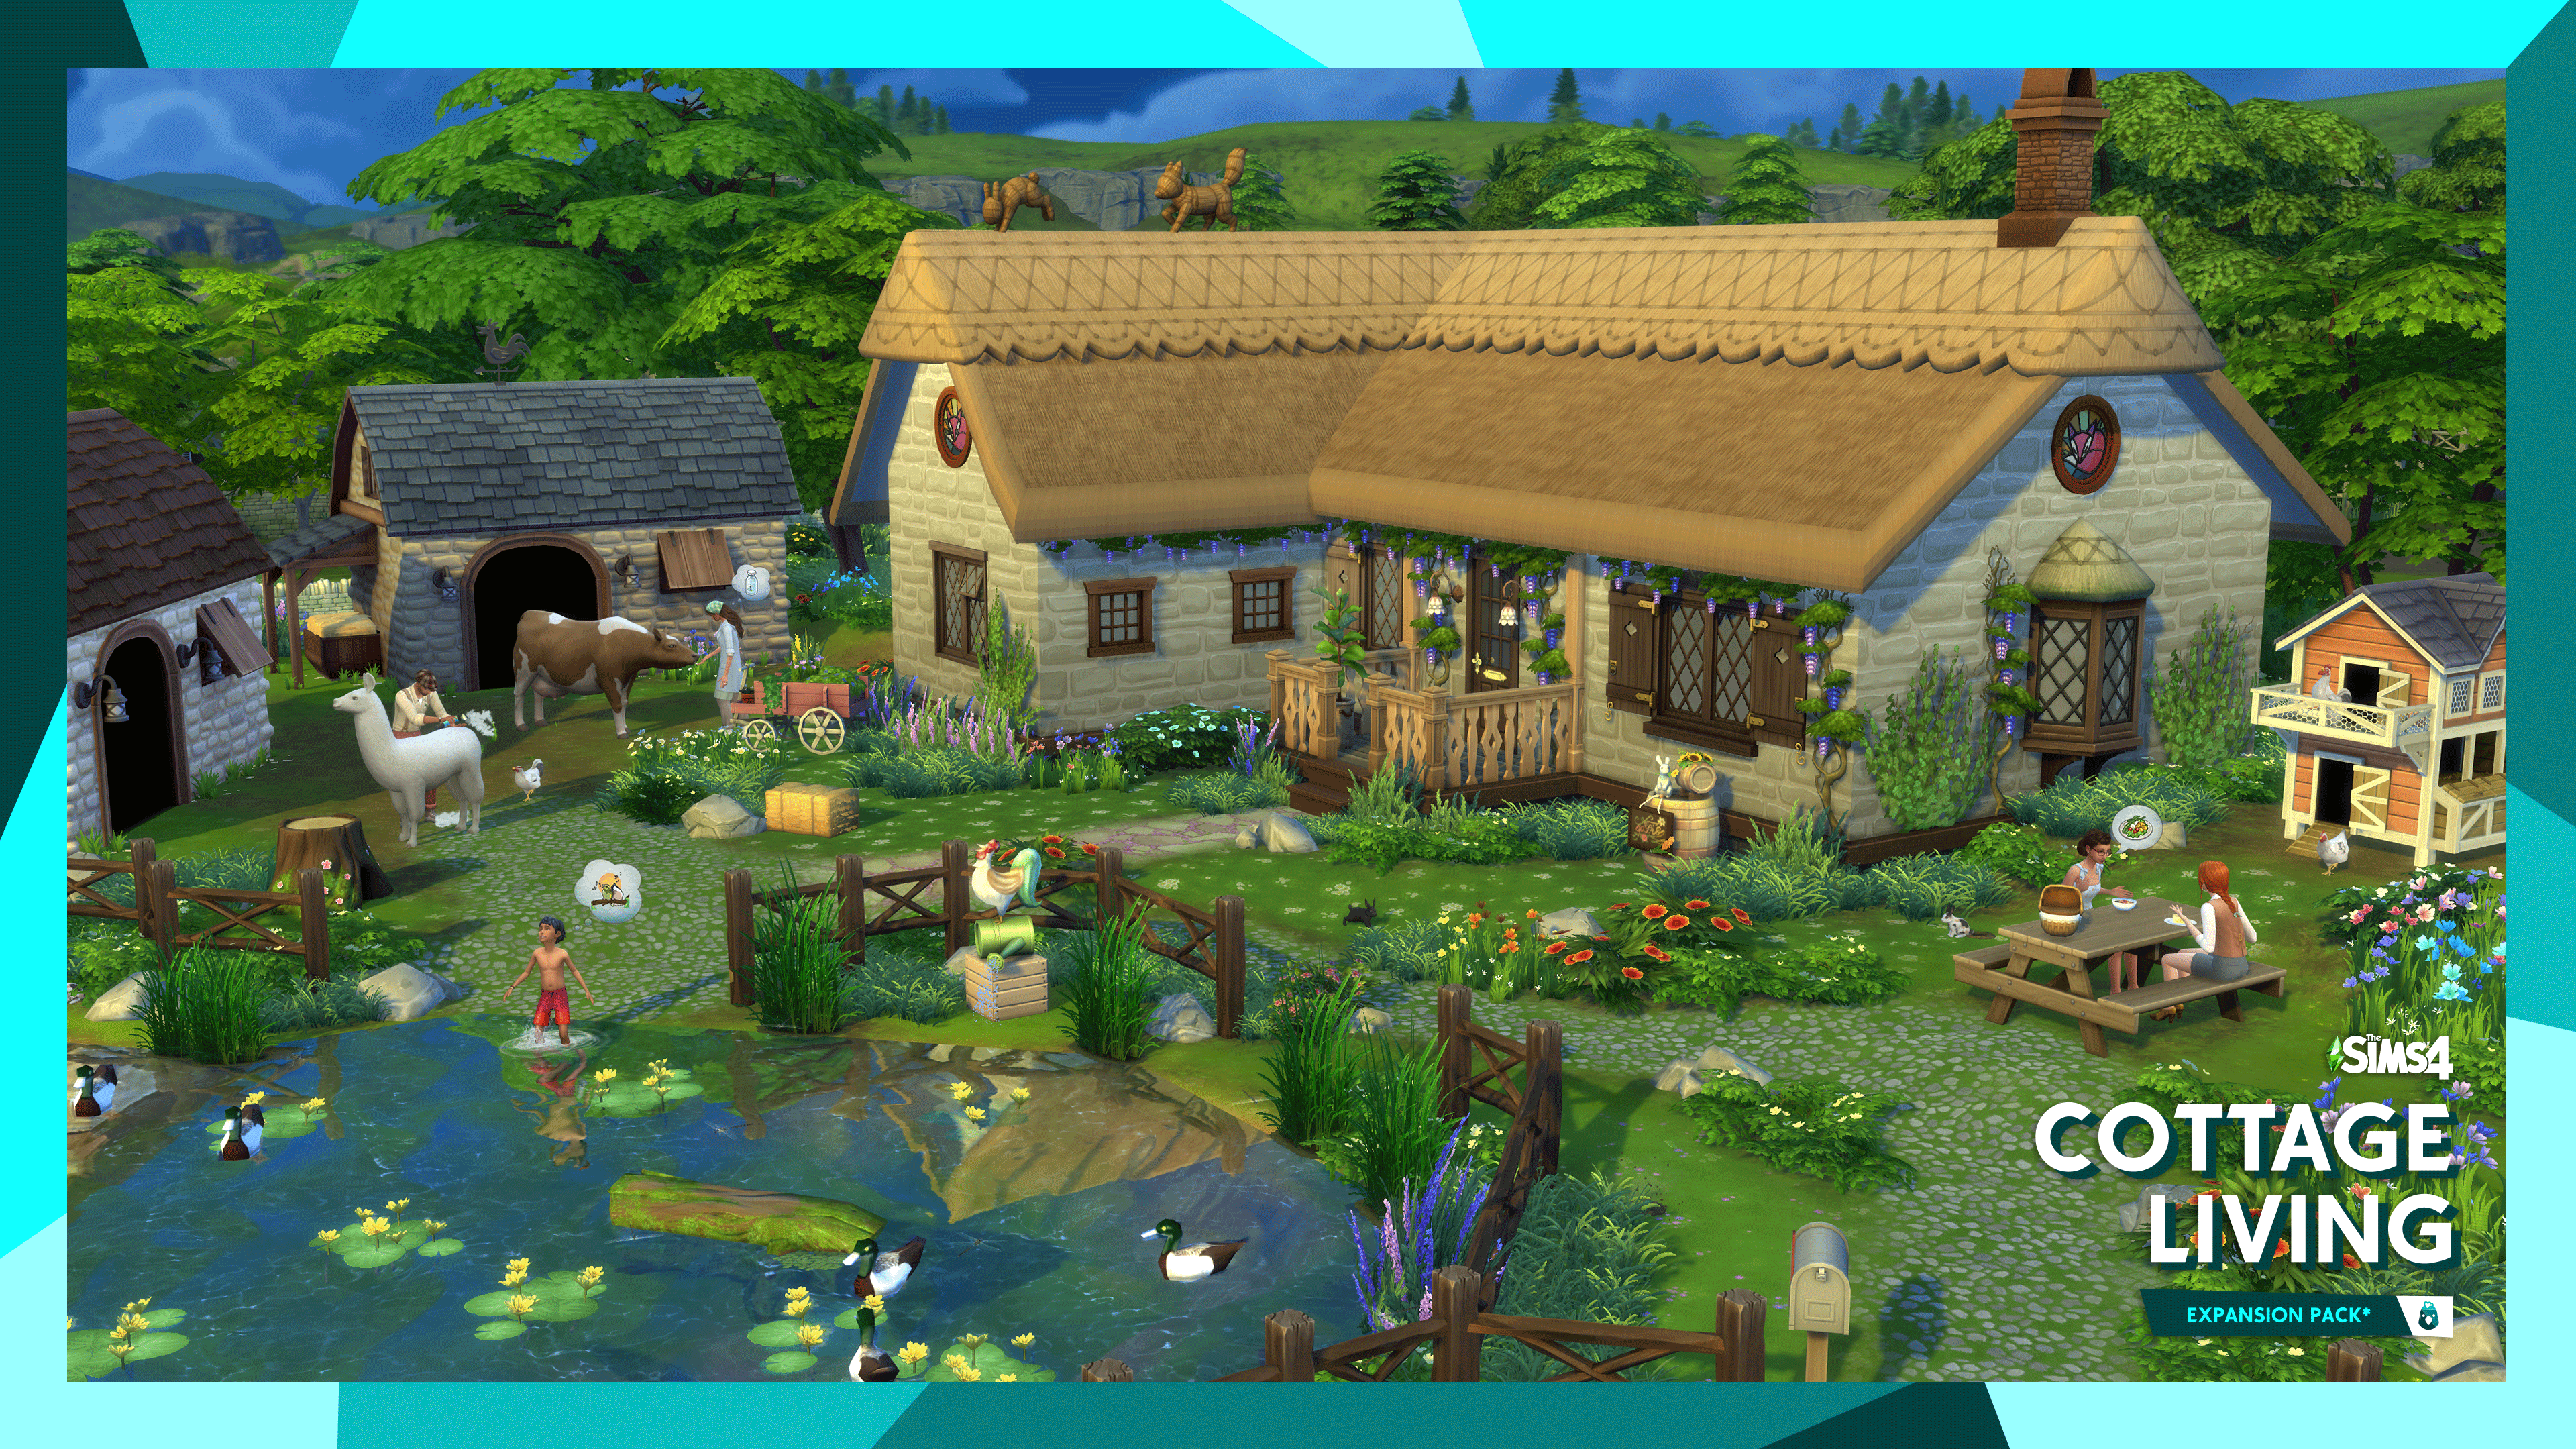 A screenshot of one of the cottages in Sims 4 Cottage Life